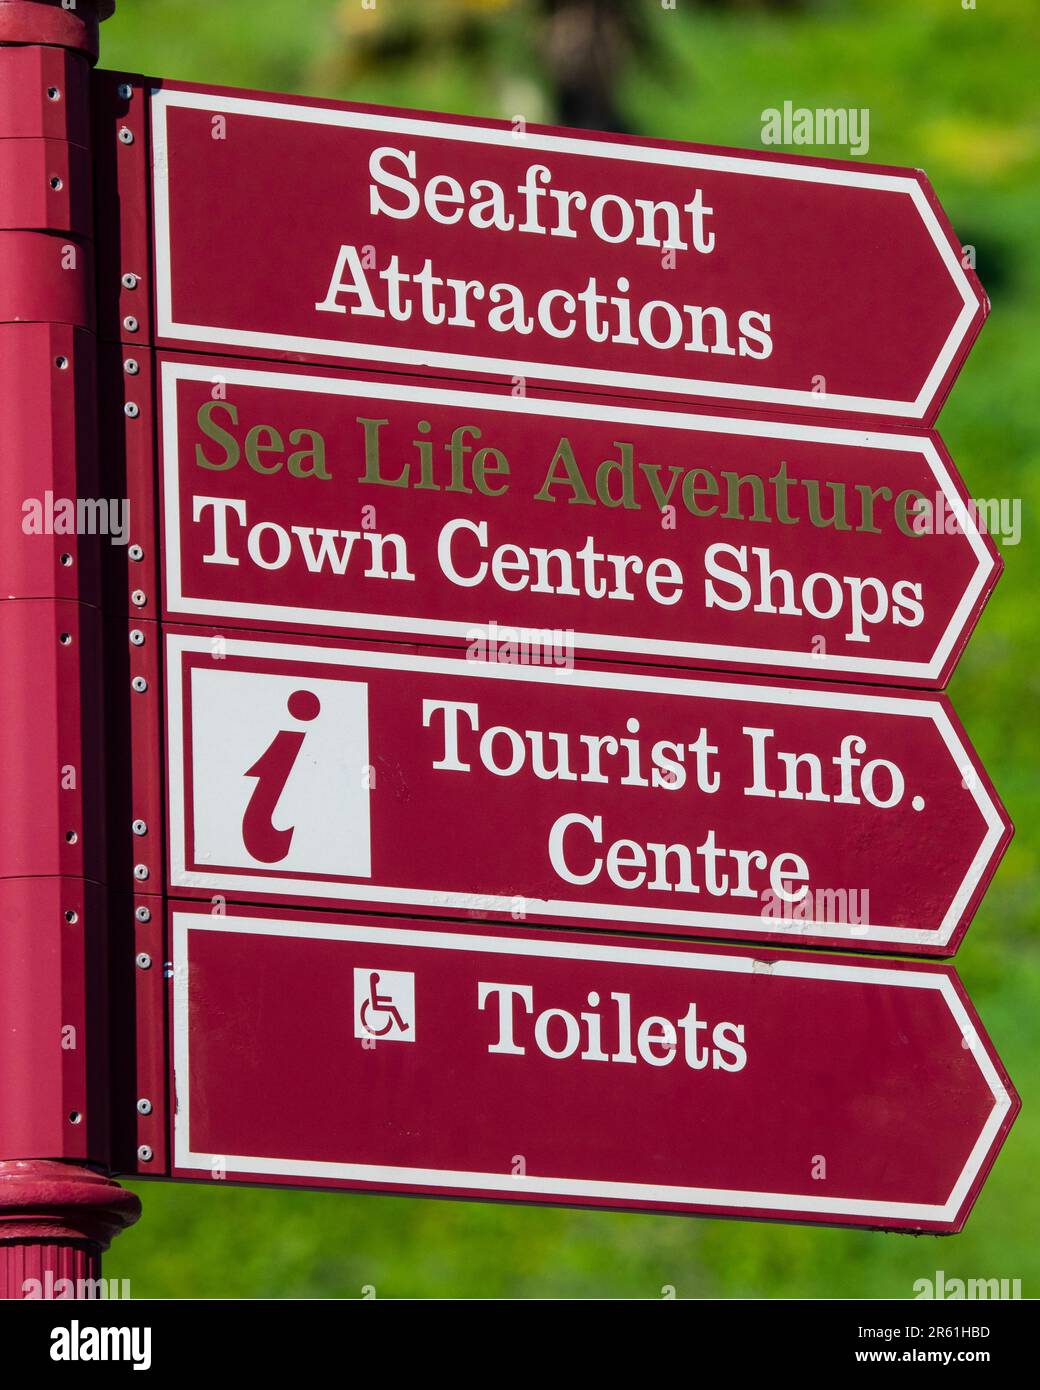 Signposts showing the directions to local tourist attractions in the city of Southend-on-Sea in Essex, UK. Stock Photo